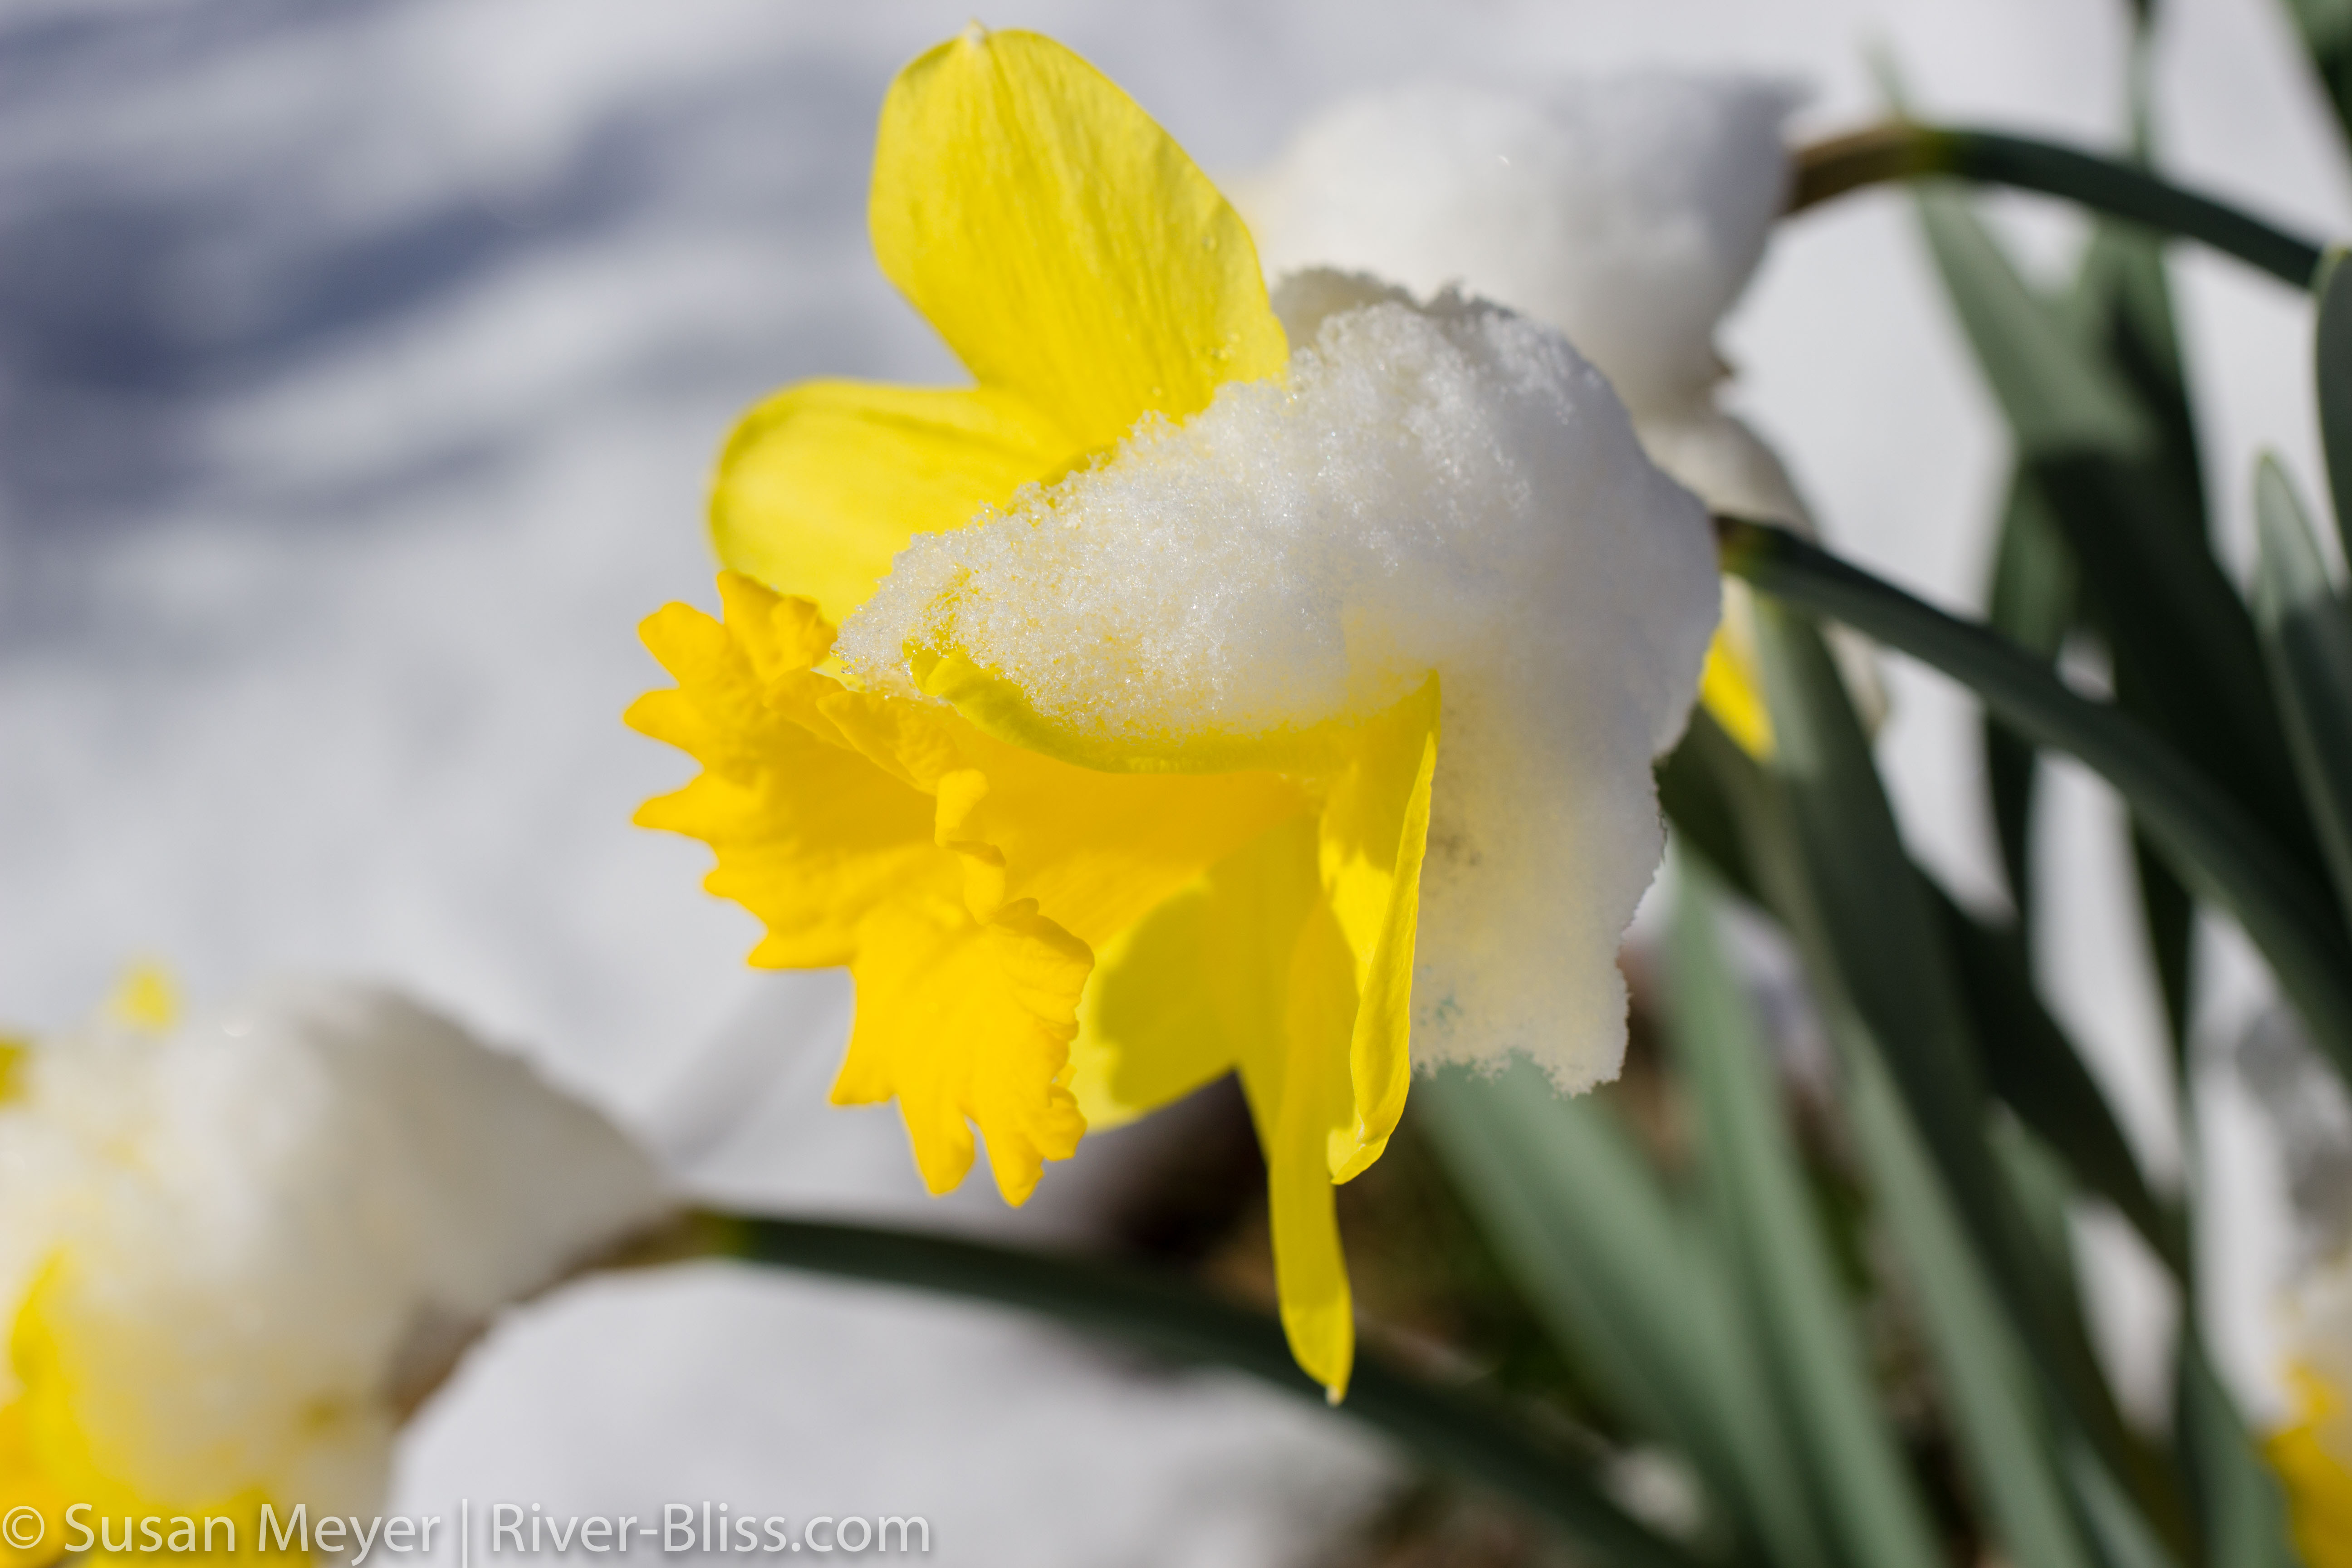 When Snow-Covered Daffodils Speak | River Bliss